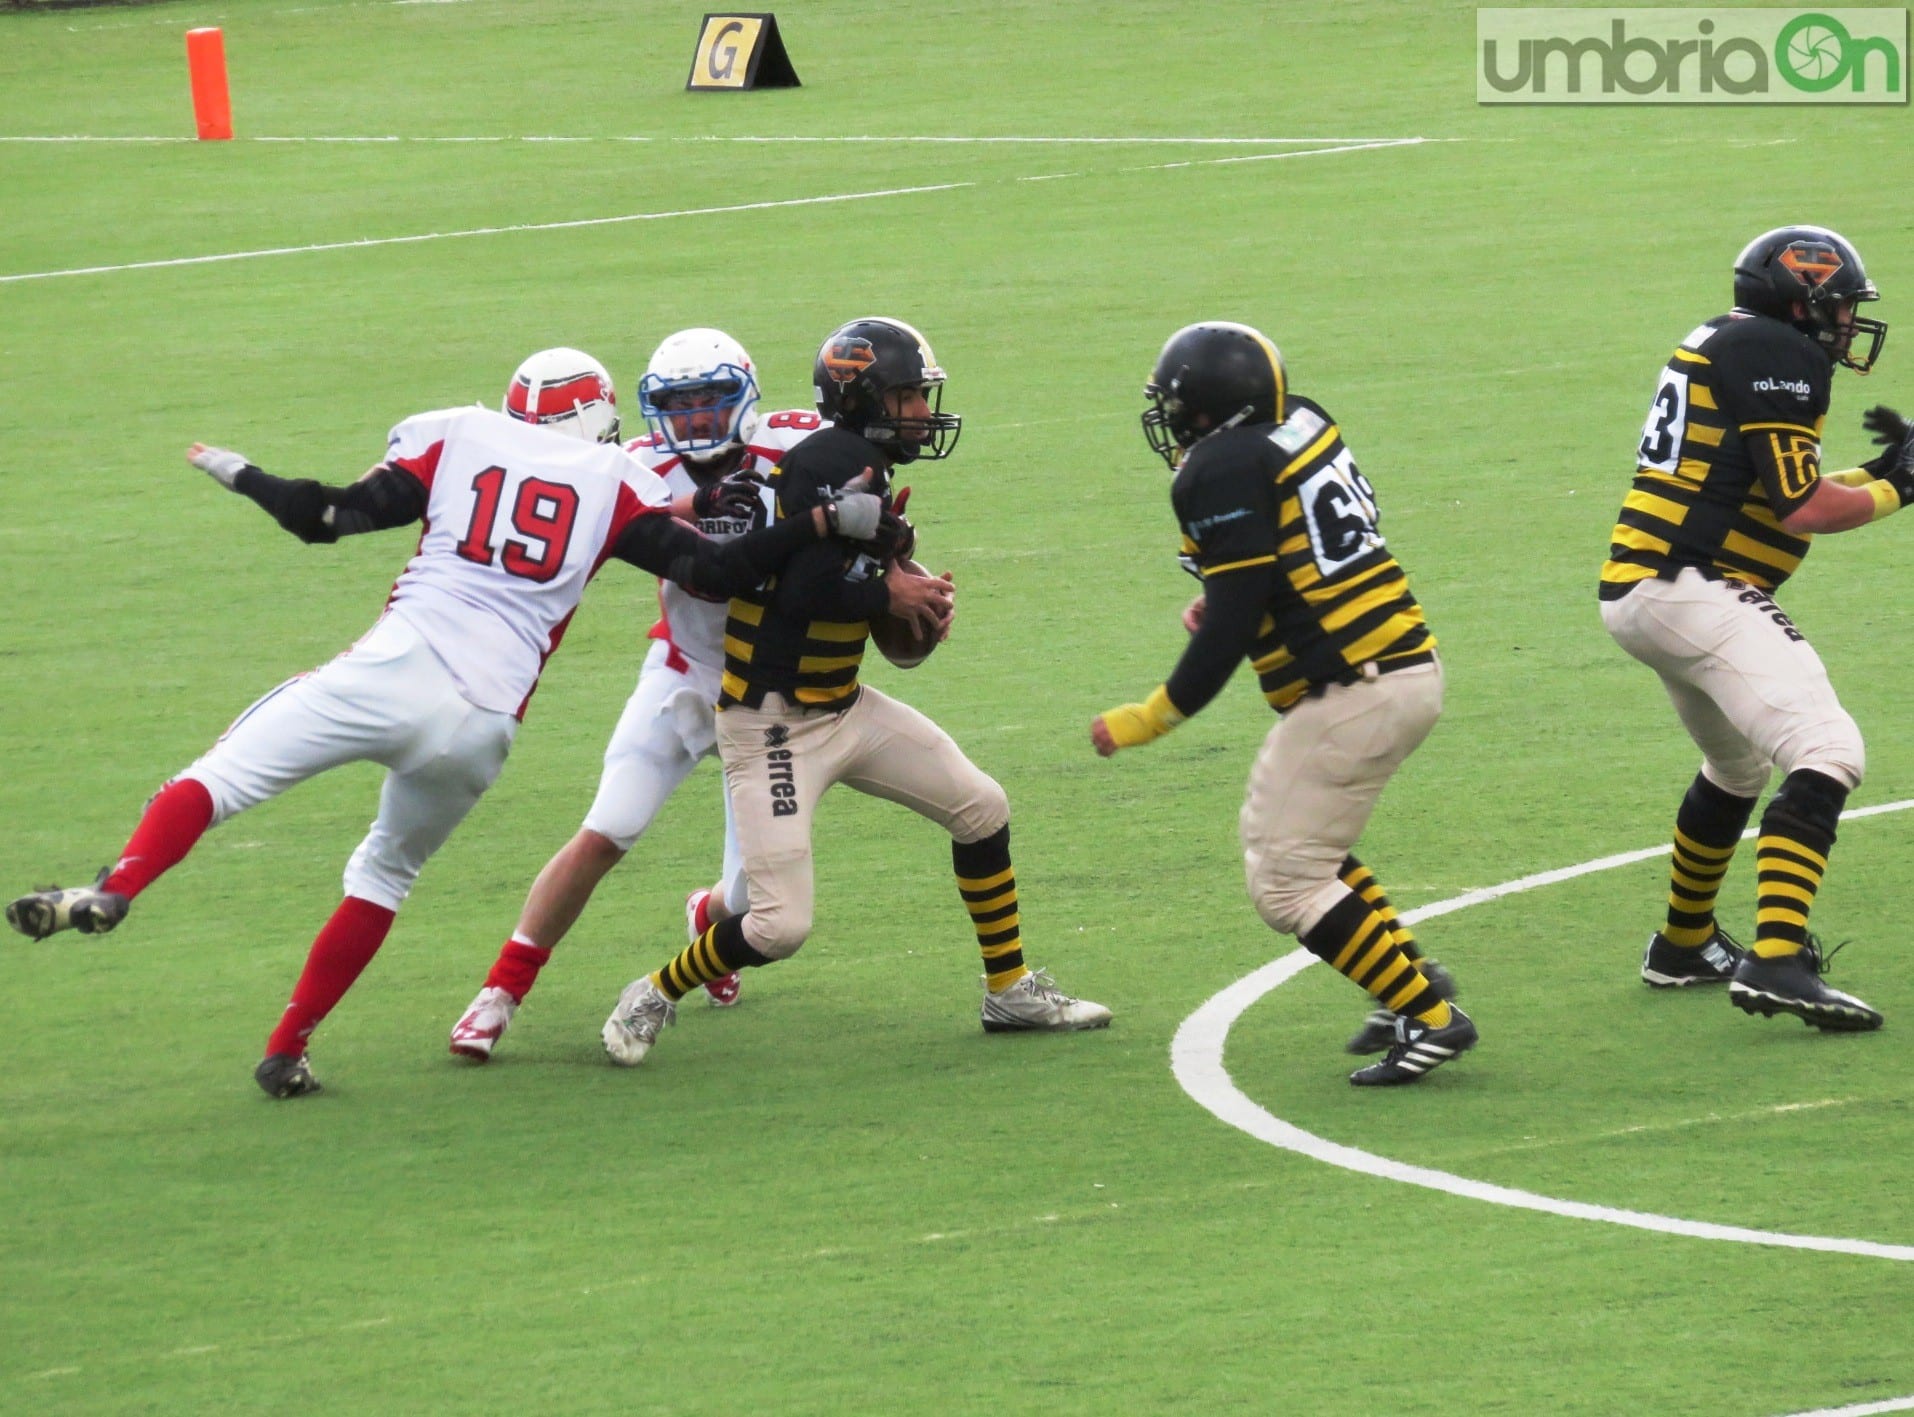 steelers grifoni football95 | umbriaON